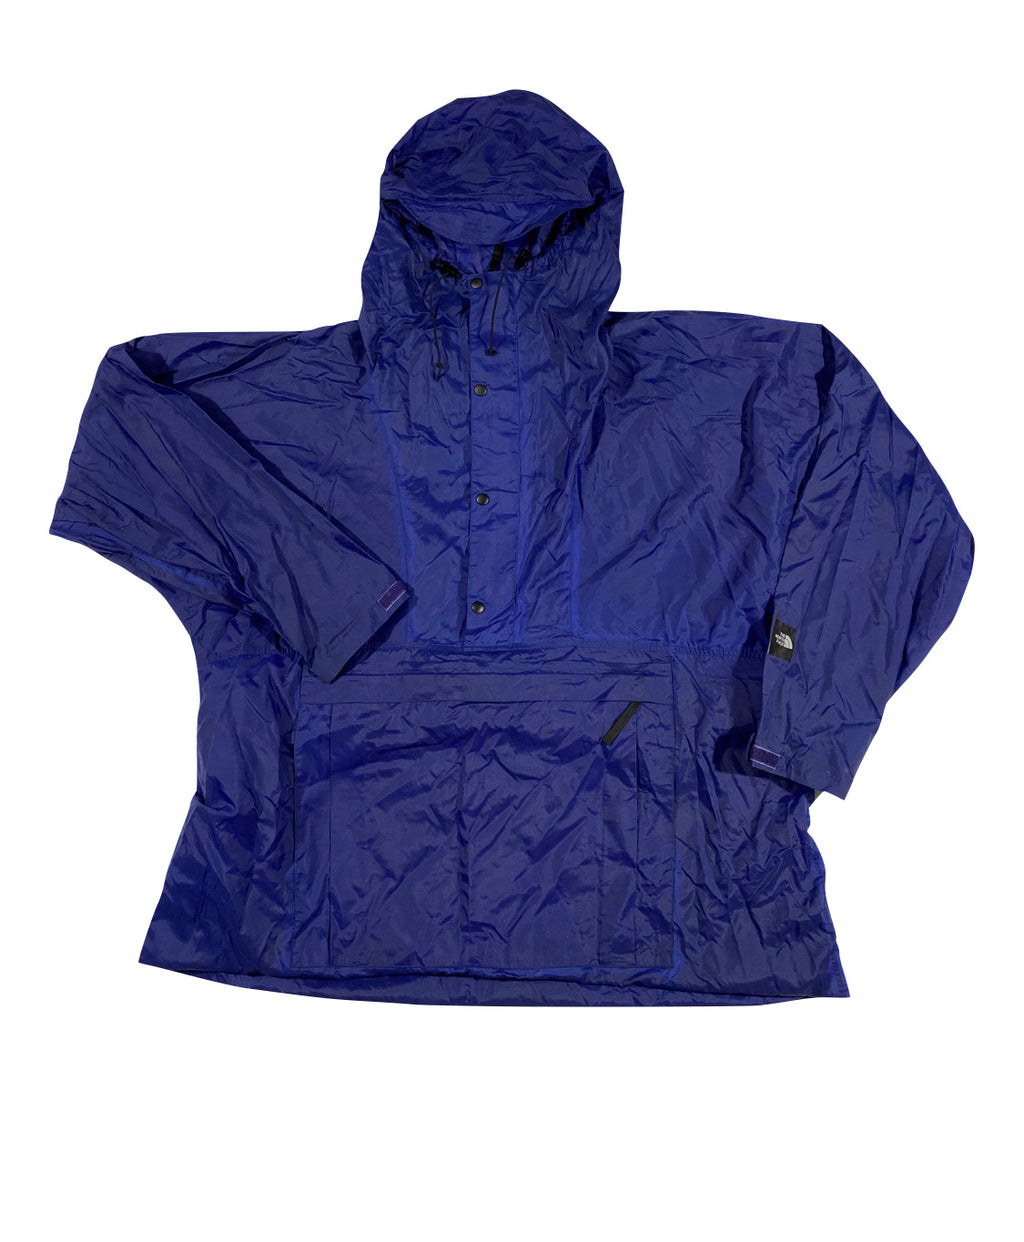 90s Northface rain jacket. folds up with snaps to become regular length large